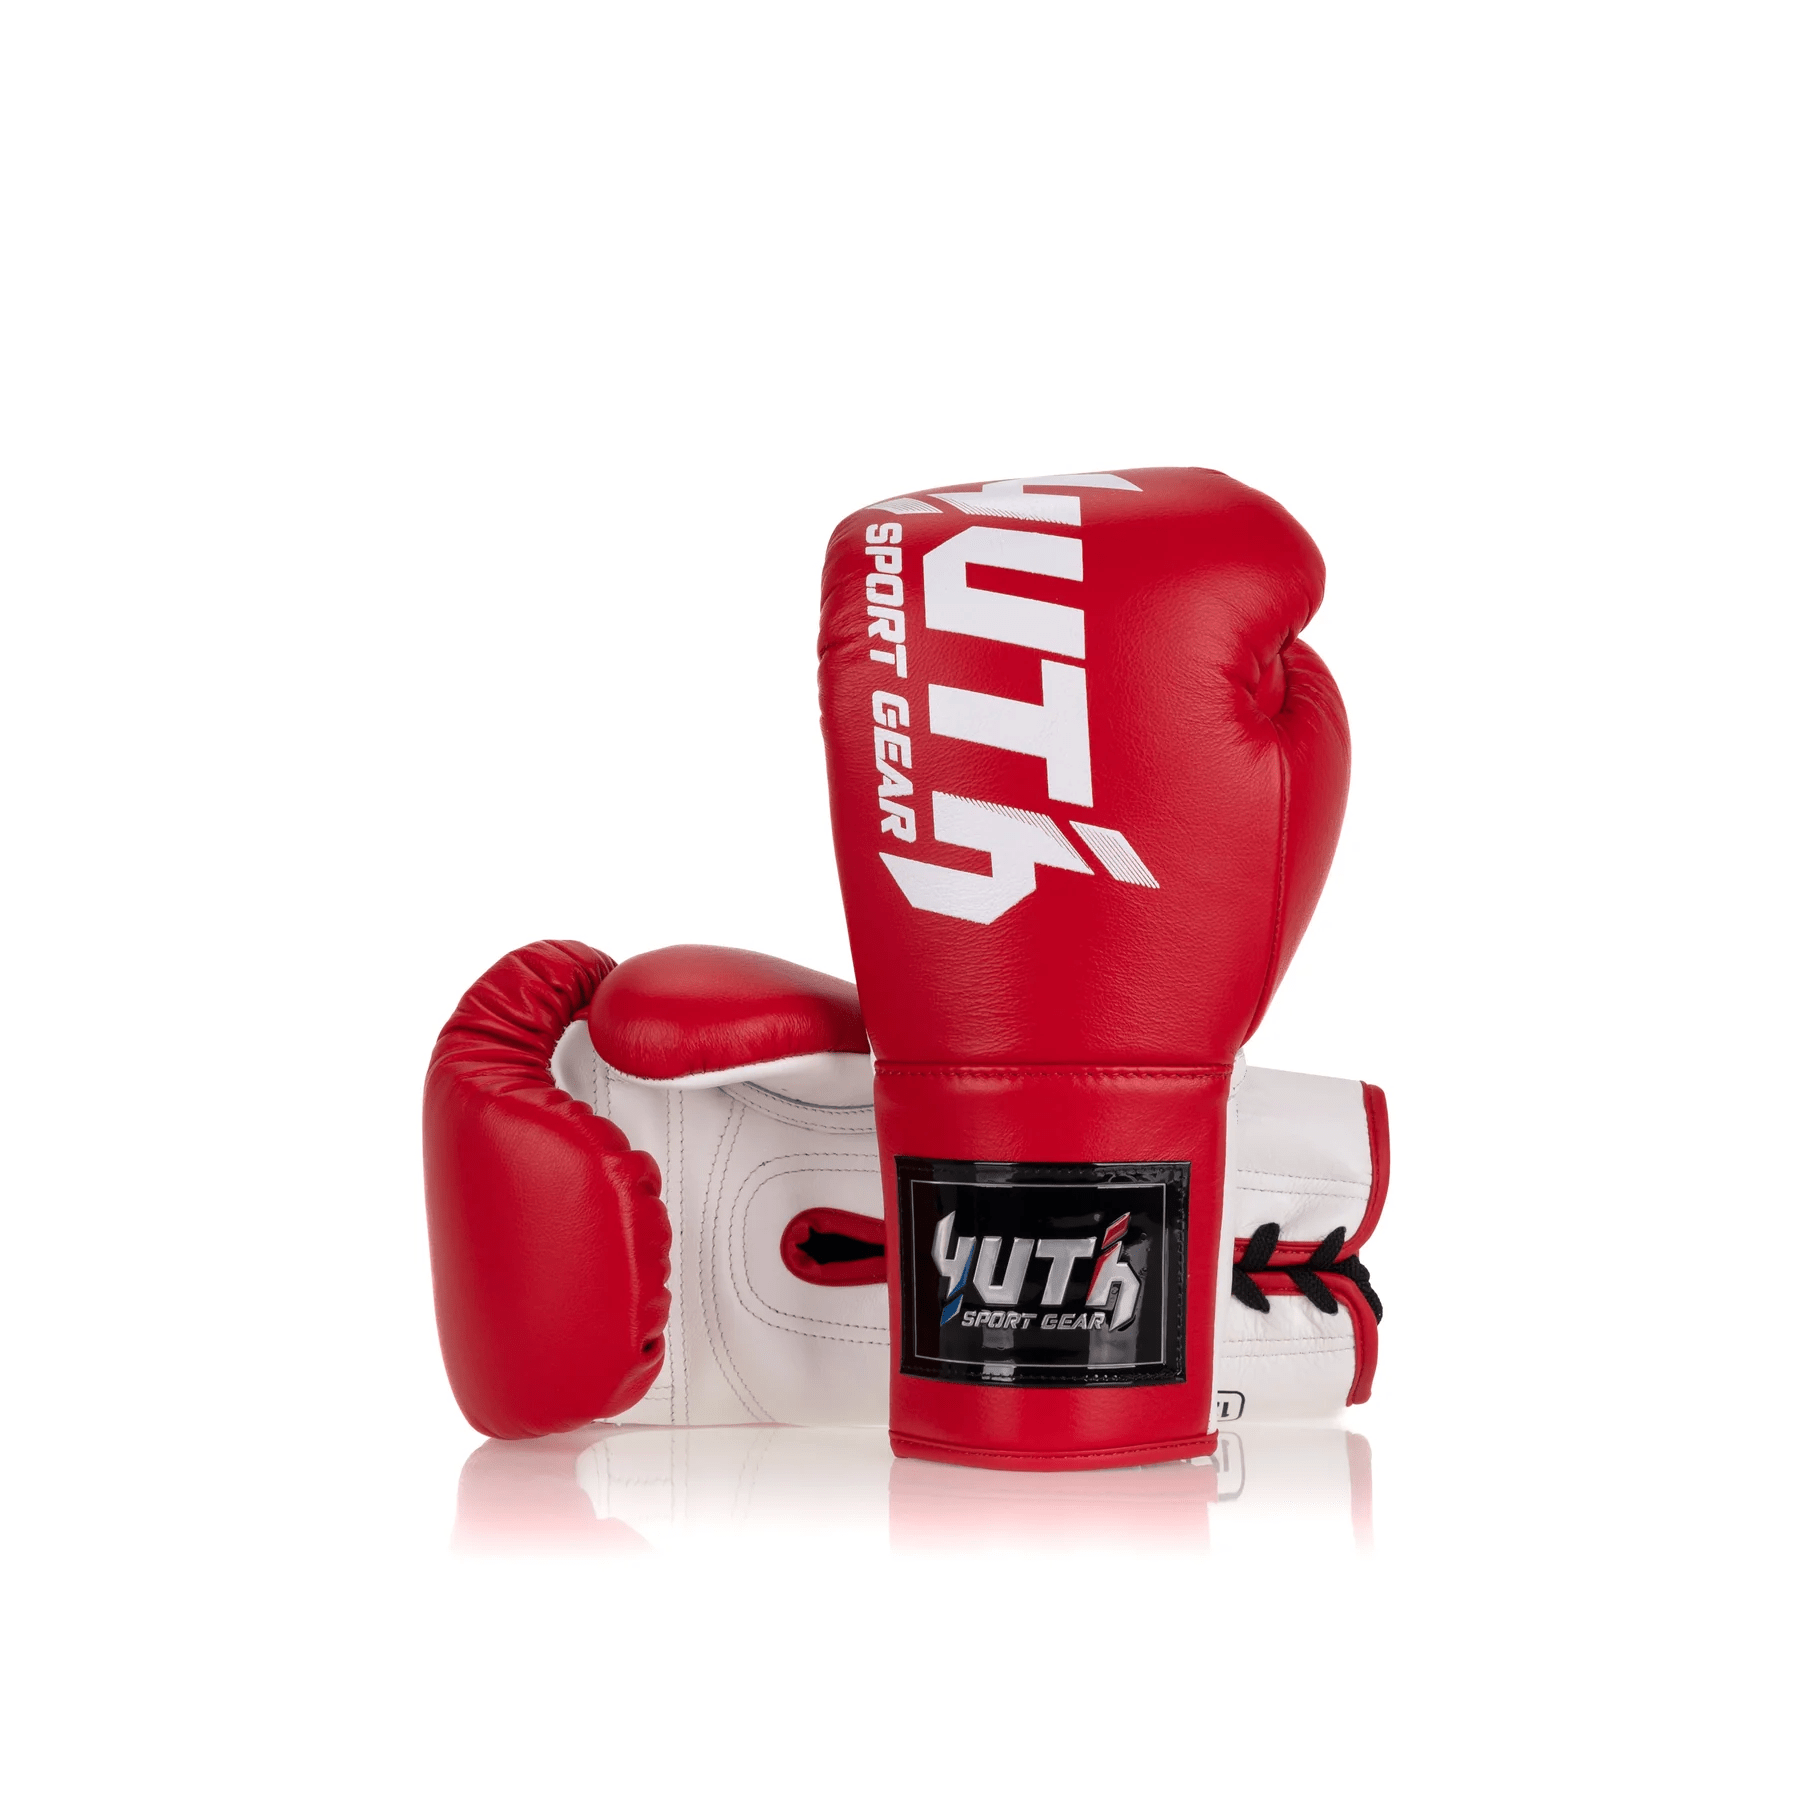 Yuth Competition Boxing Gloves - Fight.ShopBoxing GlovesYuthRed8oz